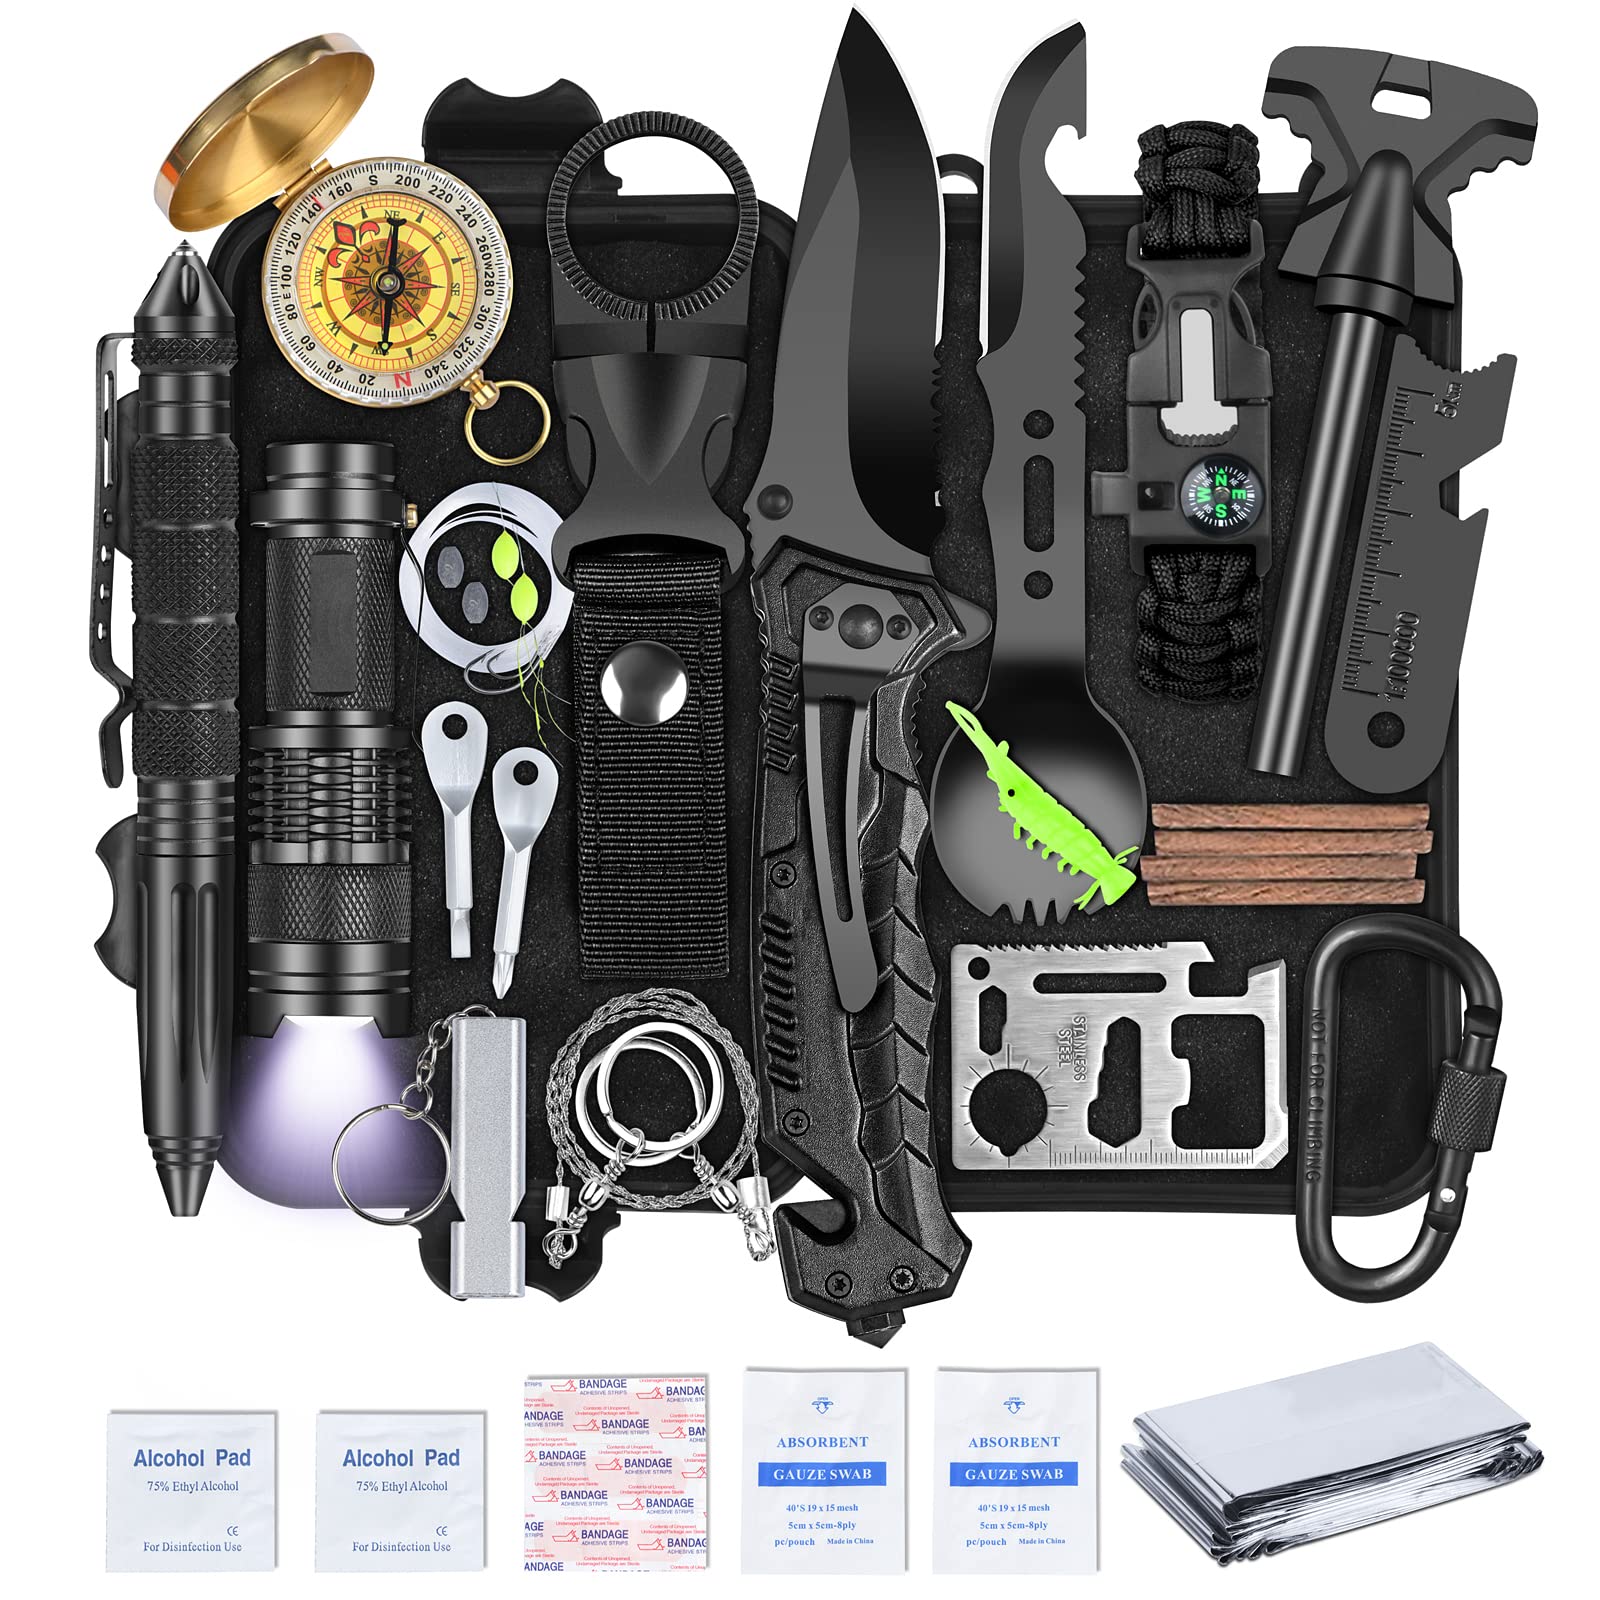  Emergency Survival kits, 65 pcs in 1 Survival Gears with First  Aid Compass Knife Tactical Tools Cool Gadgets for Outdoor Camping Hiking  Biking Home Gifts Ideas for Men Husband Boyfriend Dad